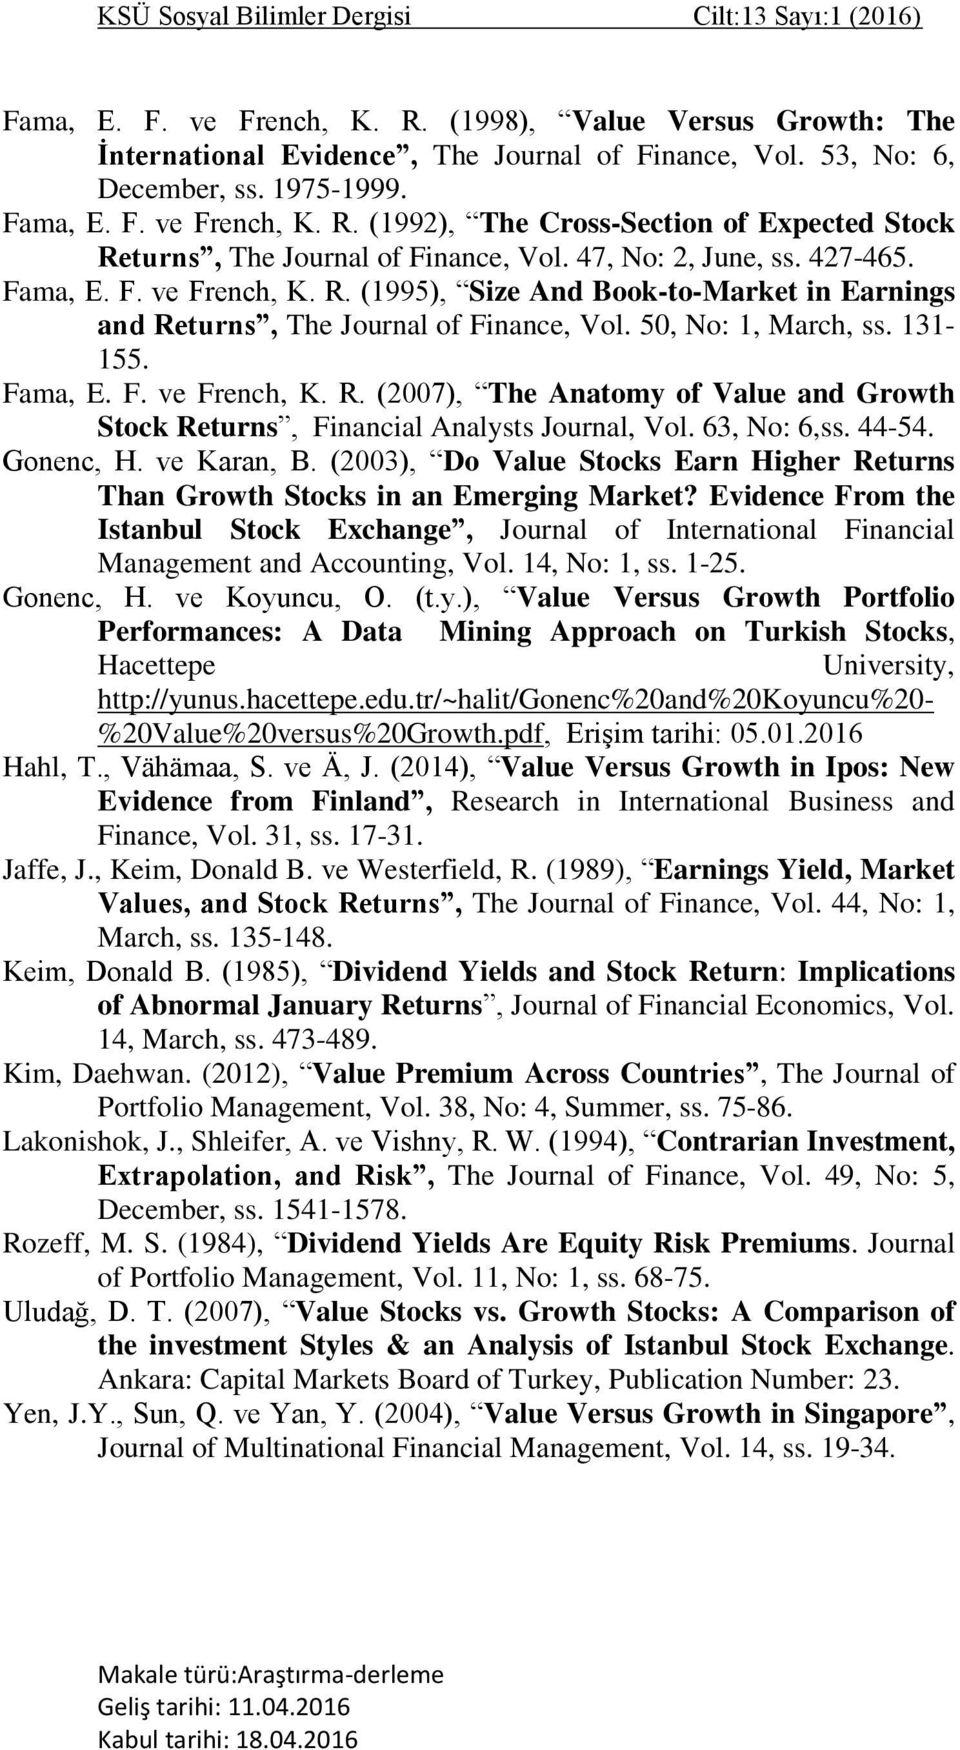 50, No: 1, March, ss. 131-155. Fama, E. F. ve French, K. R. (2007), The Anatomy of Value and Growth Stock Returns, Financial Analysts Journal, Vol. 63, No: 6,ss. 44-54. Gonenc, H. ve Karan, B.